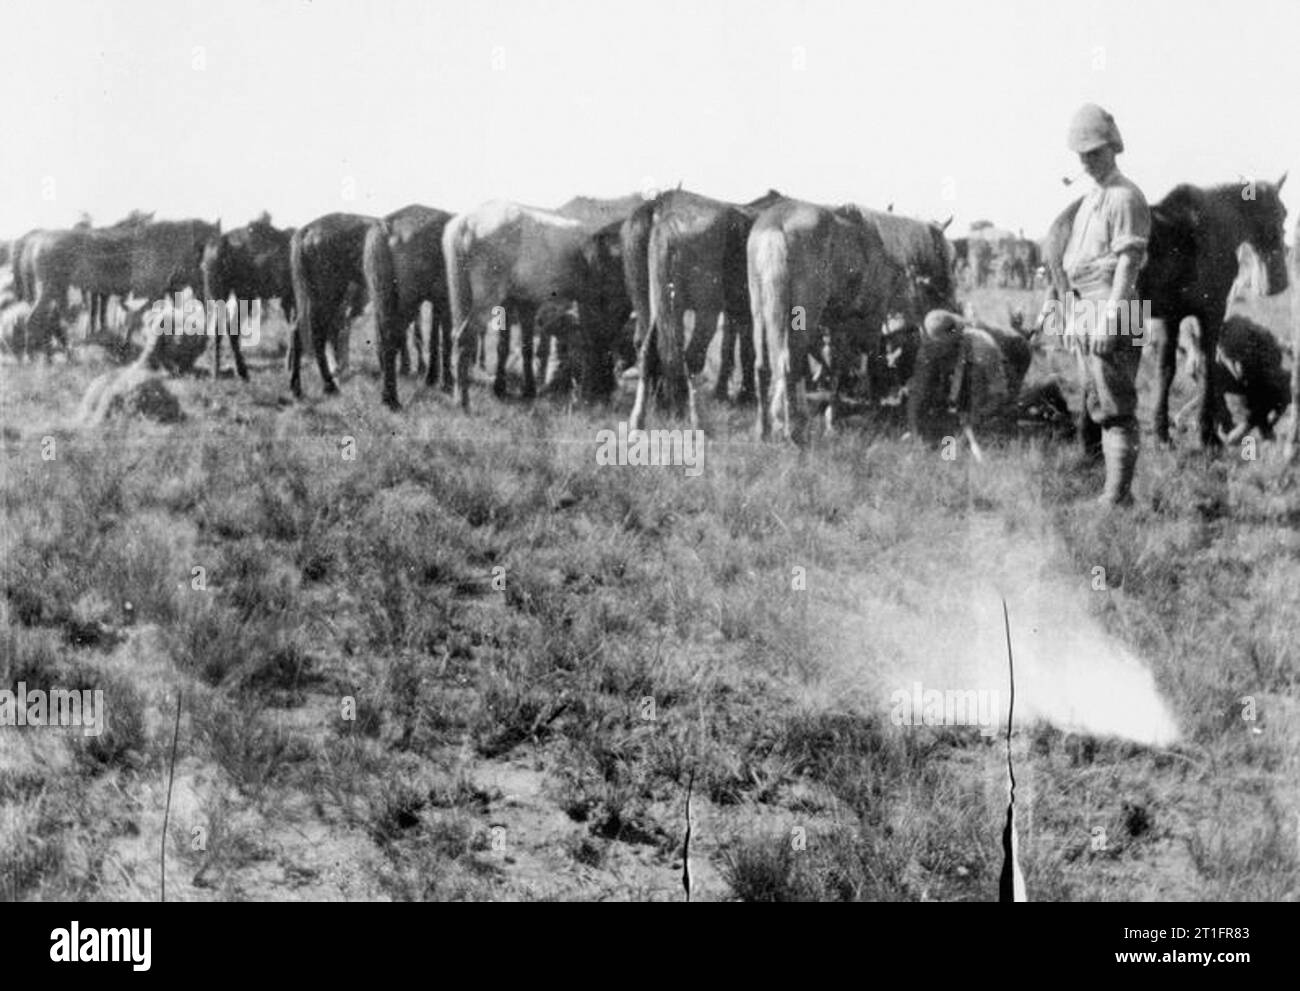 The Second Boer War, 1899-1902 Troops of one of the British regiments watering[?] horses near their camp. Stock Photo